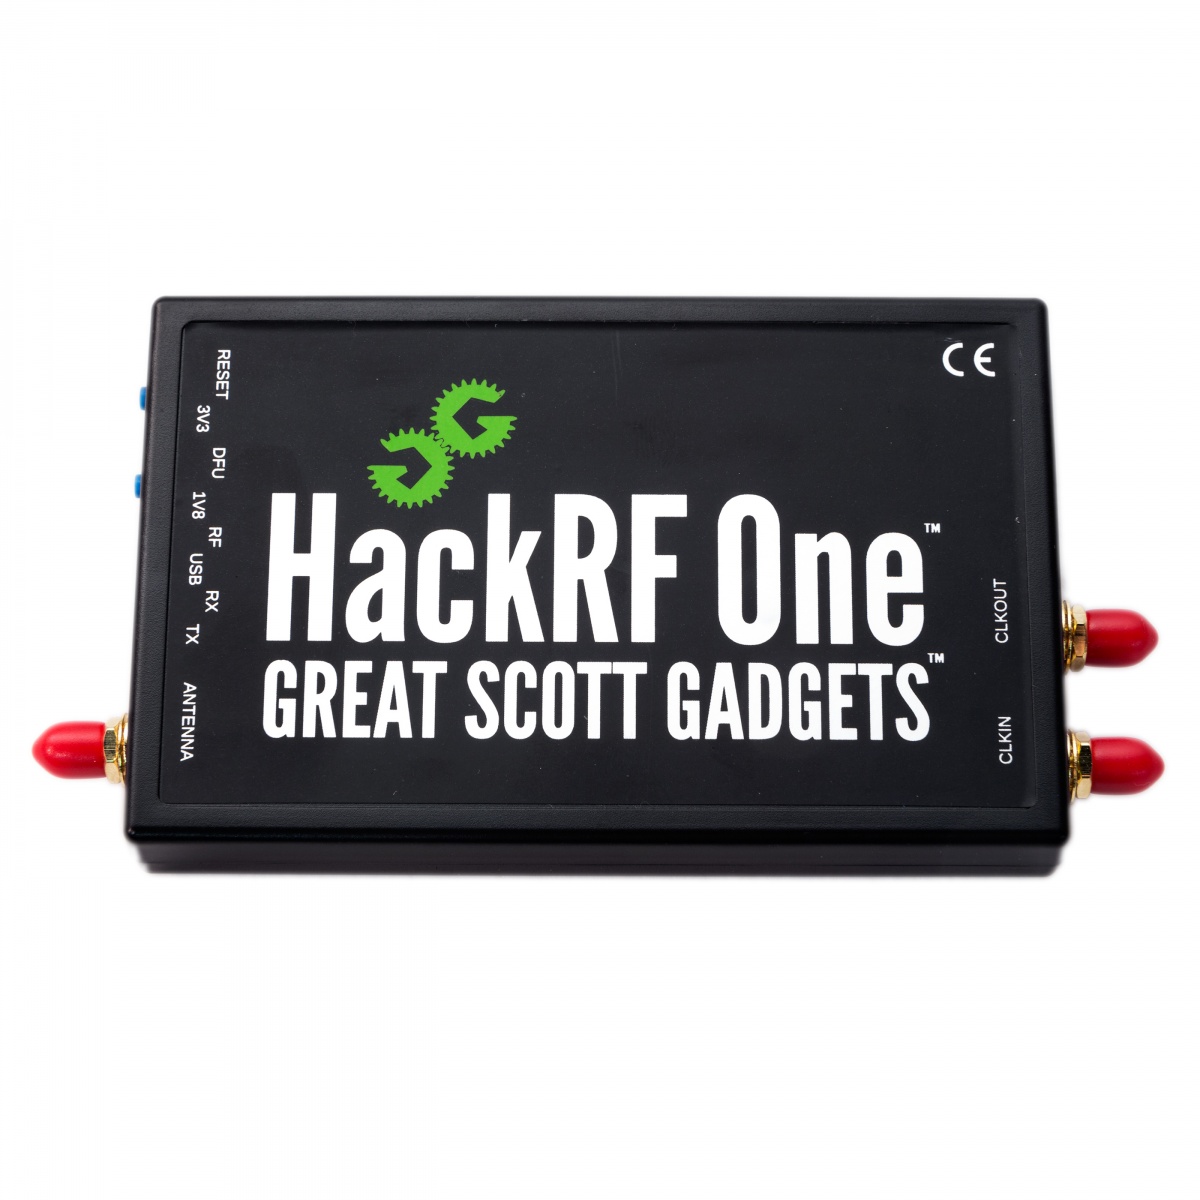 HackRF One 1 MHz - 6 GHz SDR Platform Software Defined Radio Development  Board With FM Antenna And USB Cable